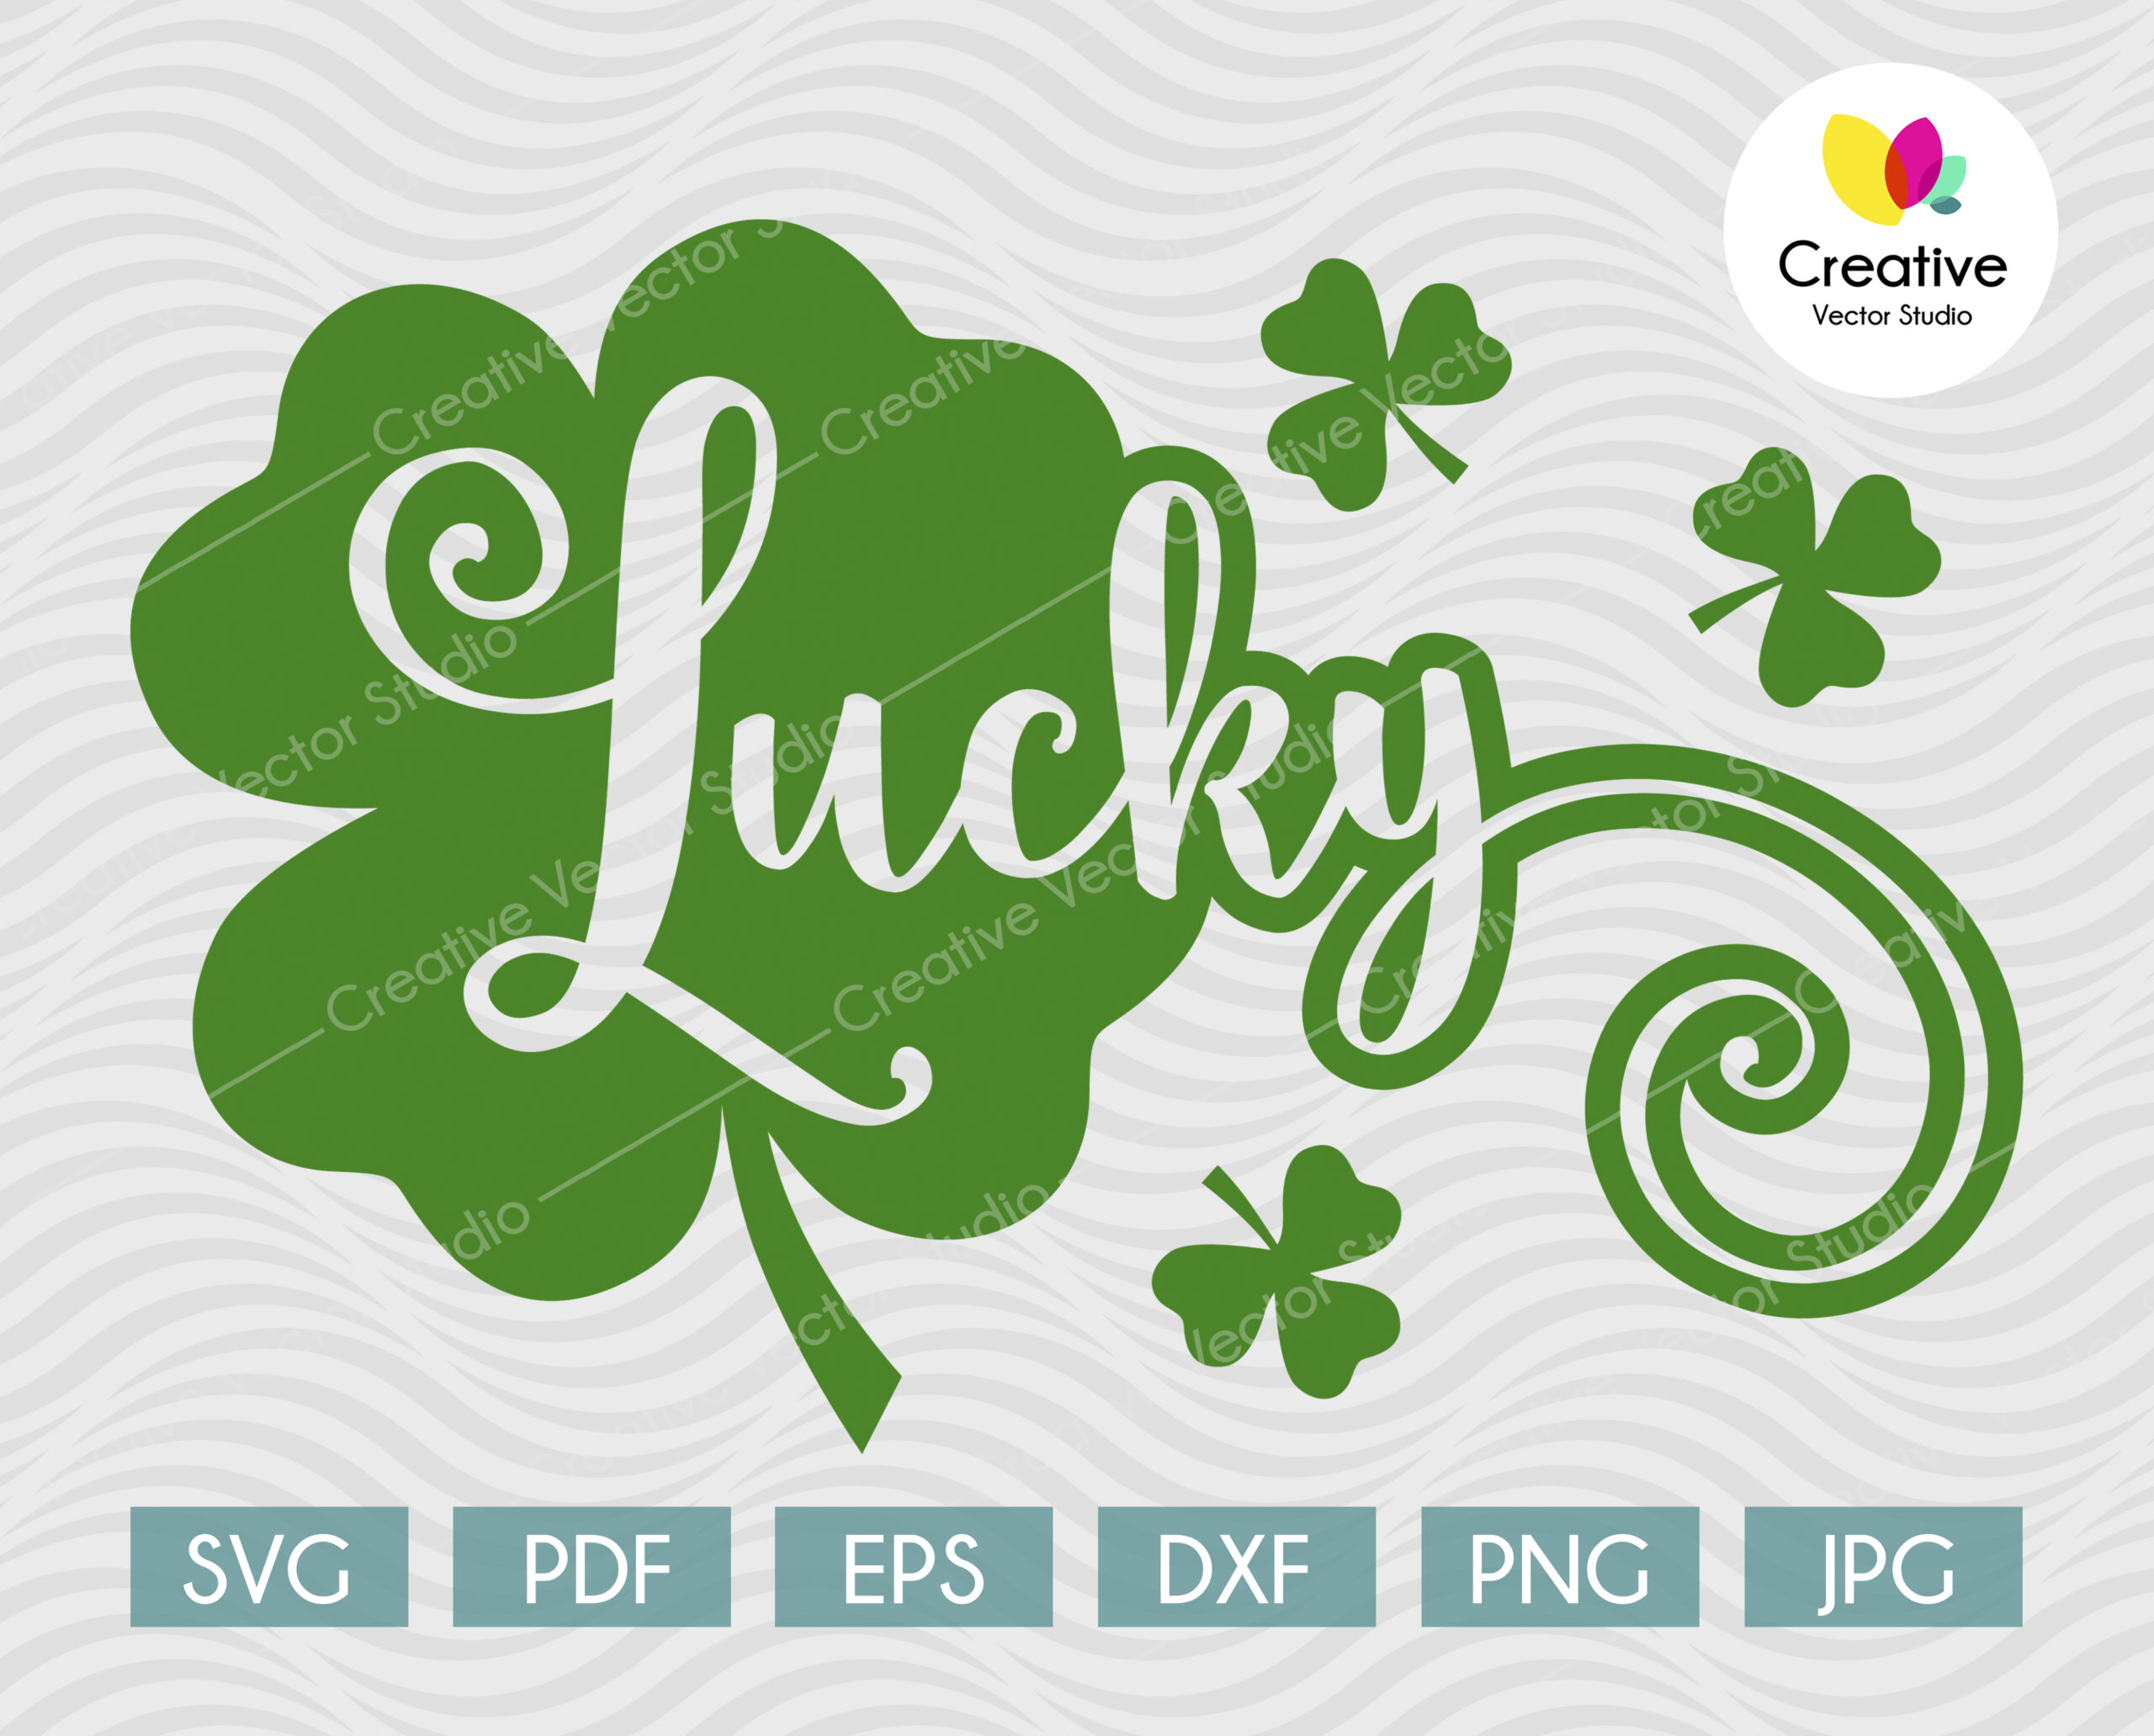 Lucky Shamrock Svg Png Dxf Cut File Creative Vector Studio